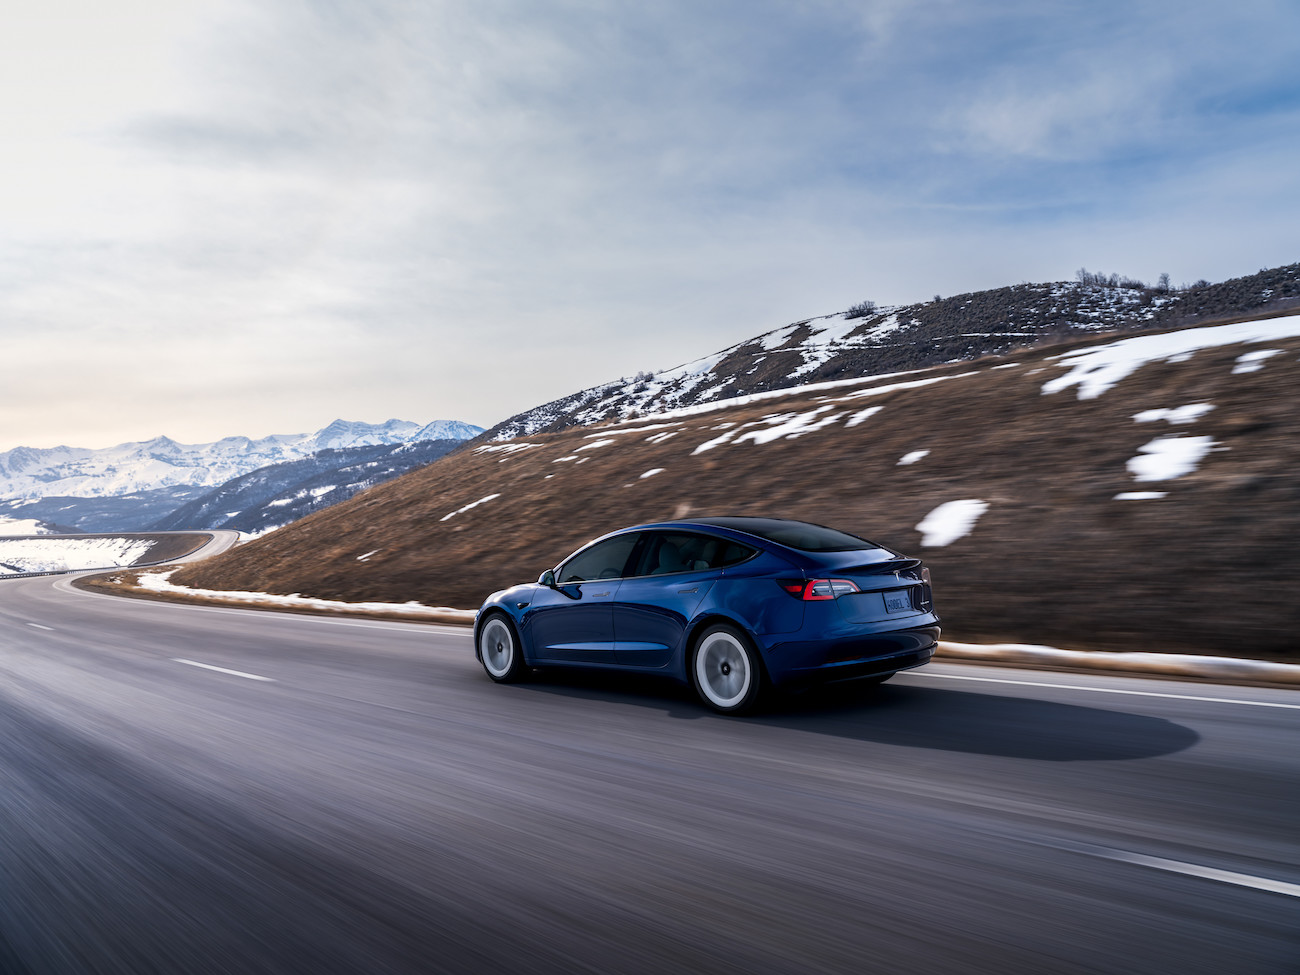 A blue Tesla Model 3 driving along a snowy mountain road. Tesla price cuts have affected the Model 3 also